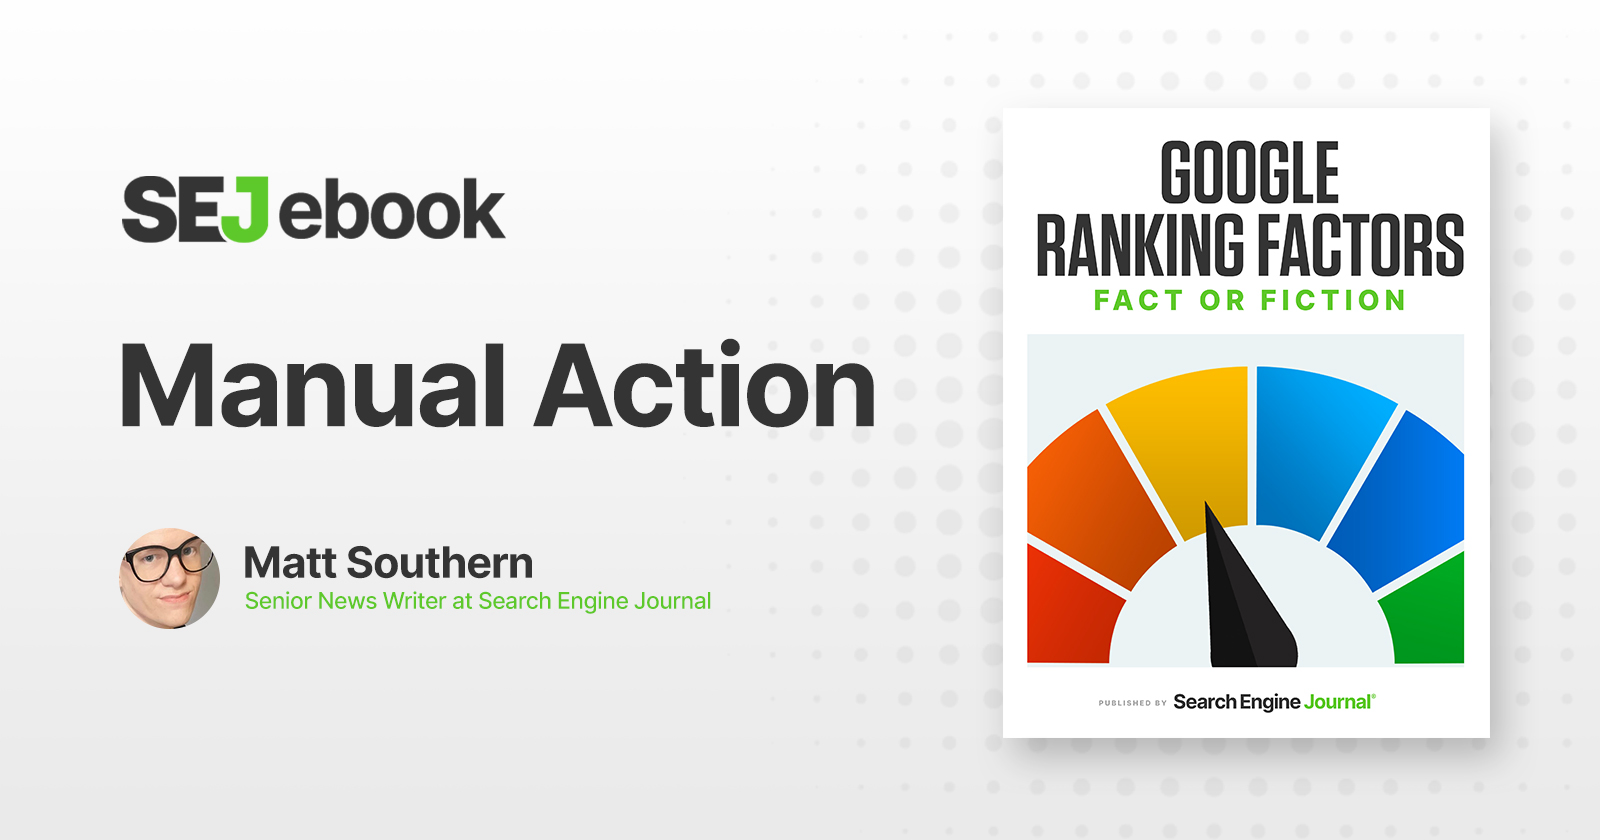 Are Manual Actions A Google Ranking Factor? via @sejournal, @MattGSouthern